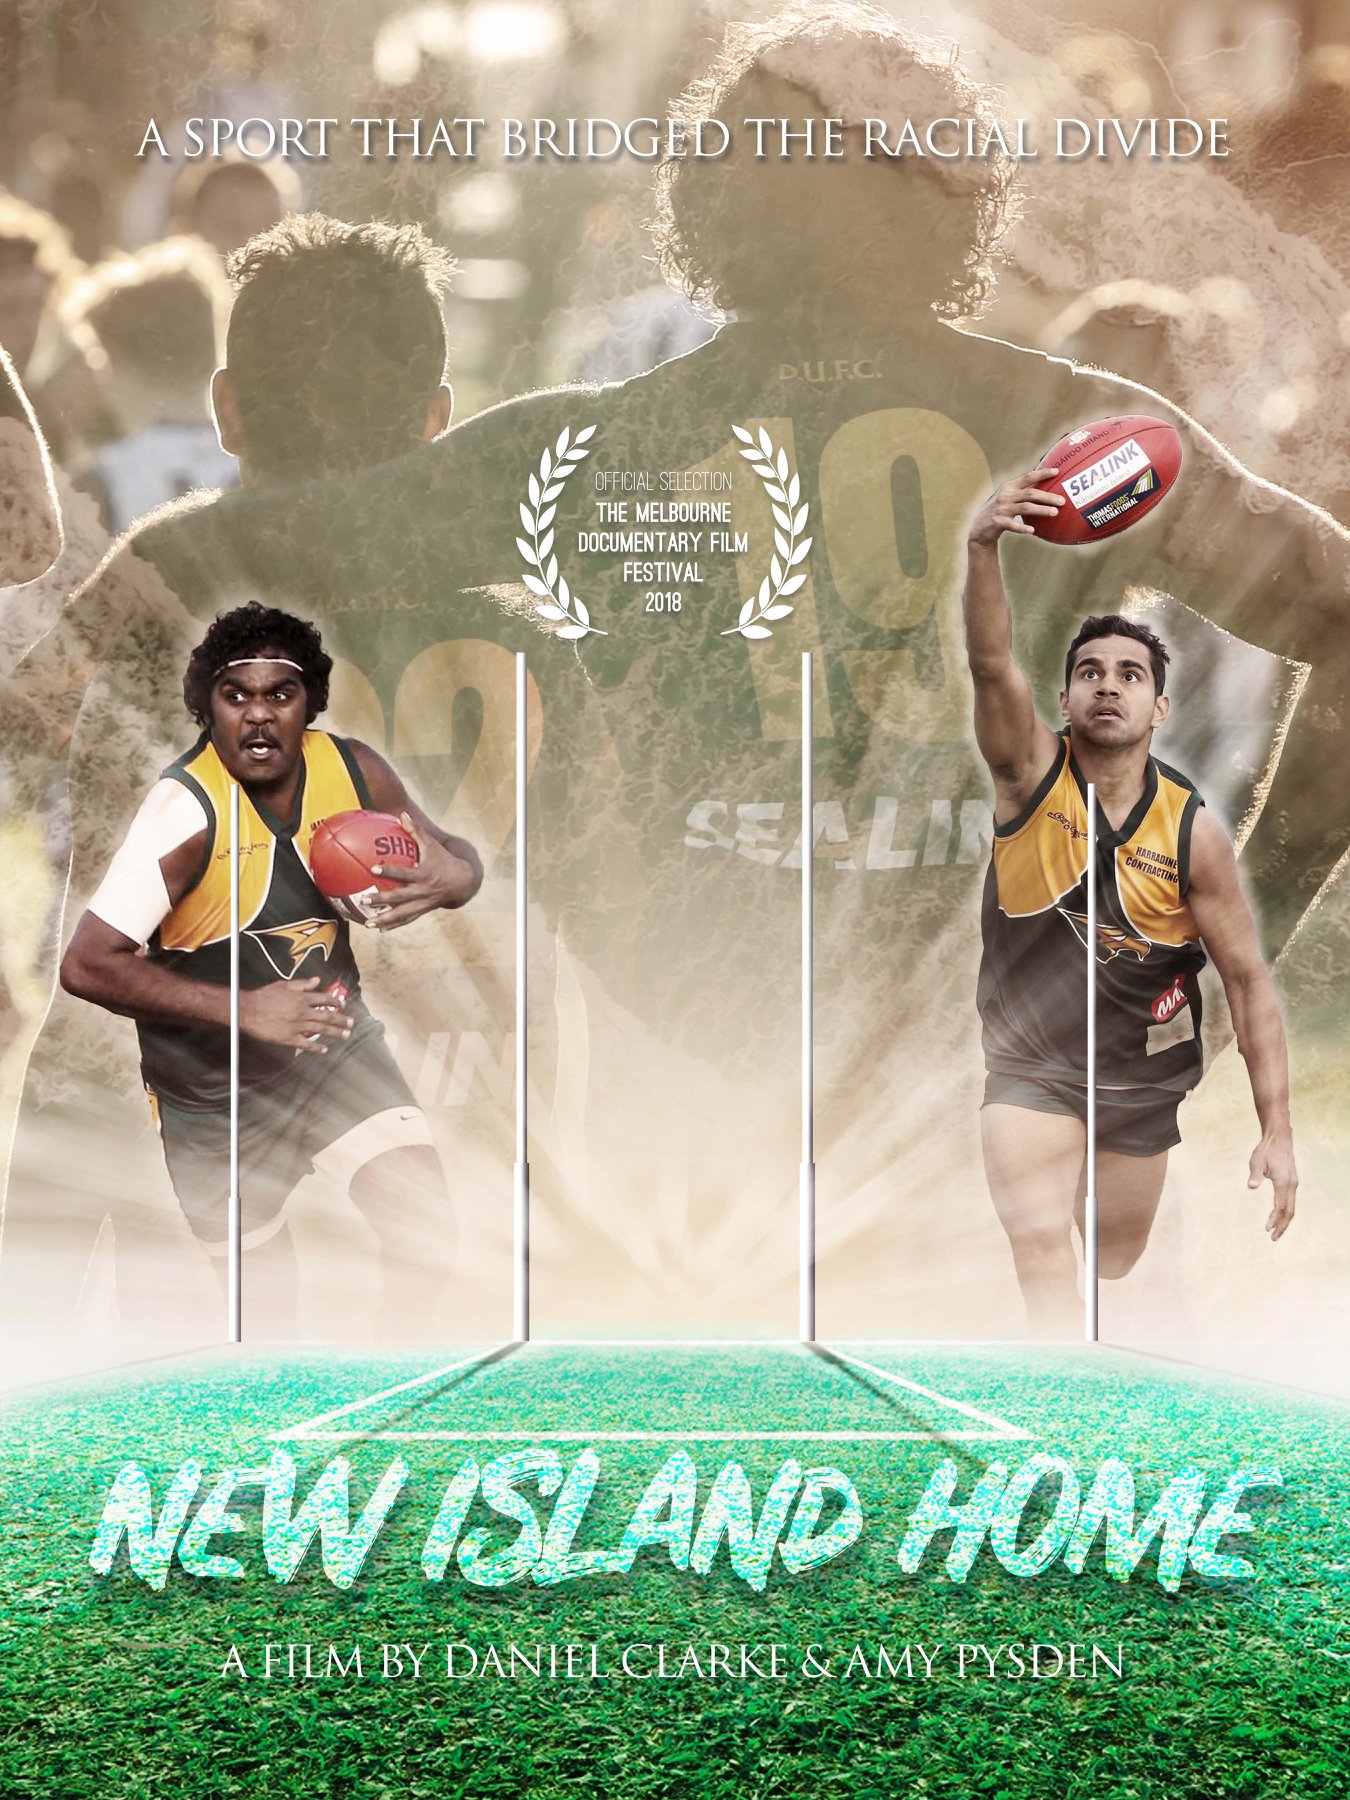 Two Indigenous footballers in action playing football - one running, another about to mark the ball. Against backdrop of two footballers arm in arm looking away from camera. Writing - New Island Home a film by Daniel Clarke and Amy Pysden